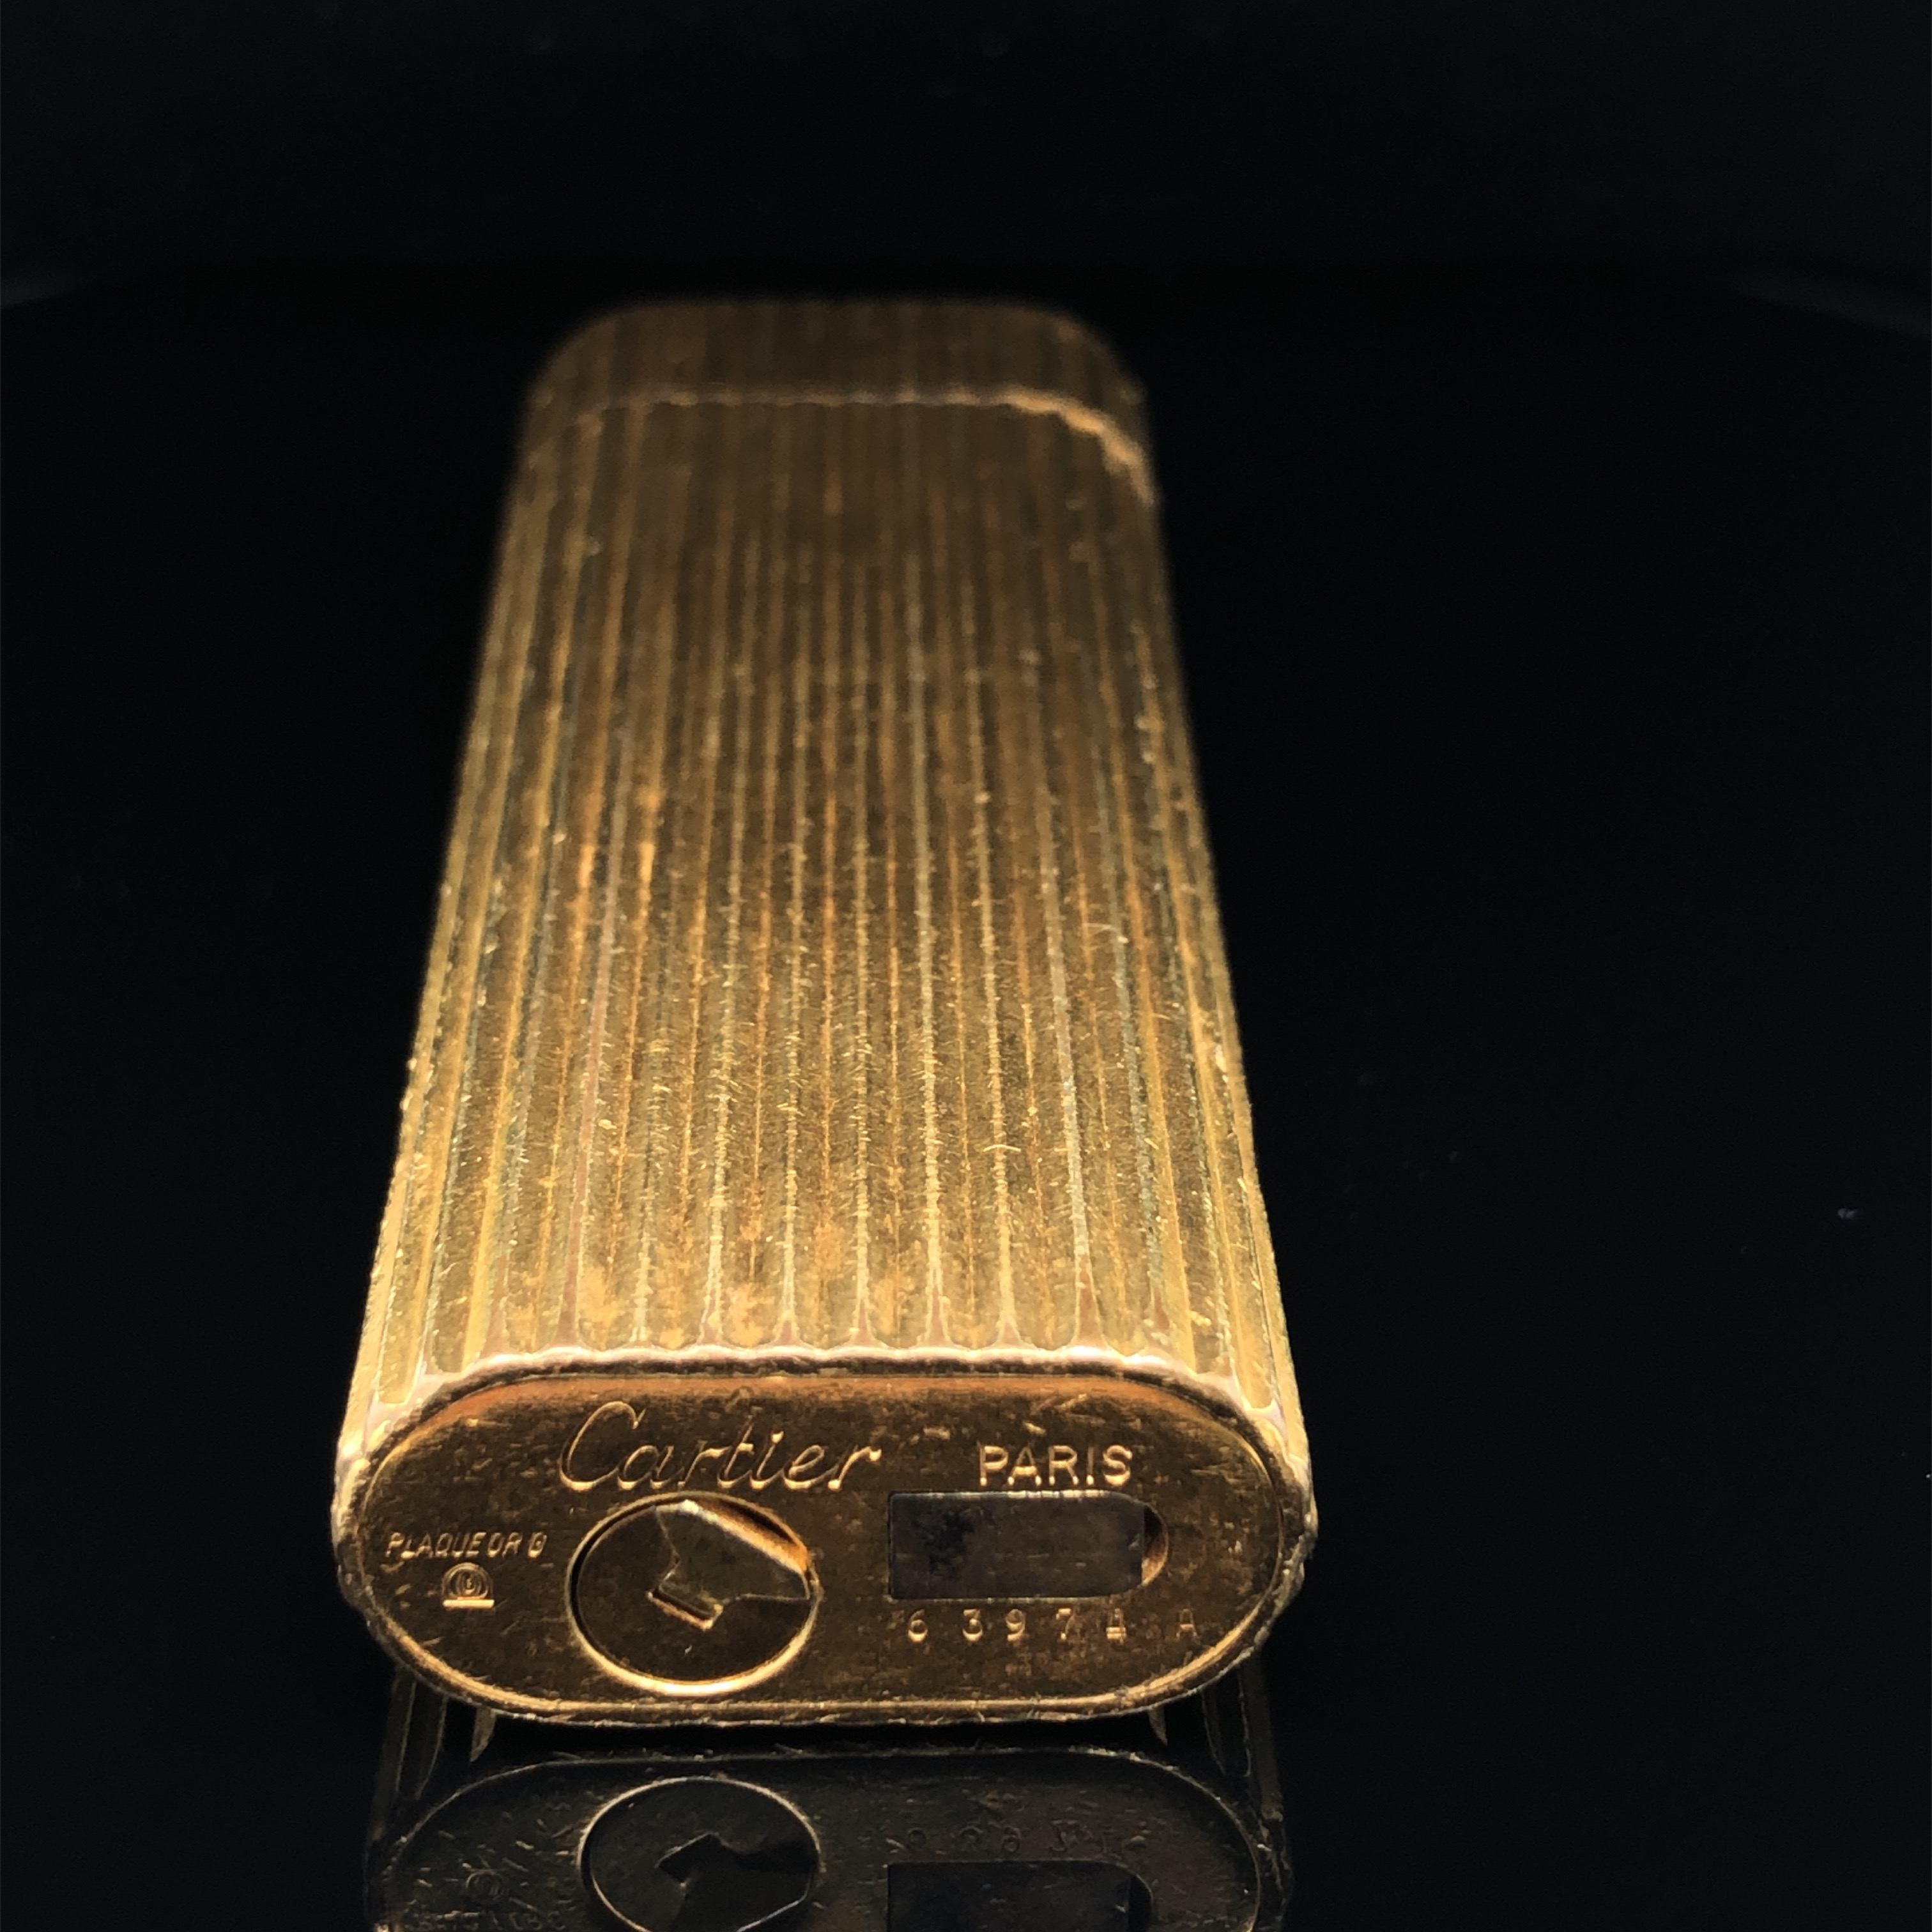 A CARTIER PARIS VINTAGE GOLD PLATED LIGHTER, 6397. HEIGHT 7cms. - Image 5 of 6